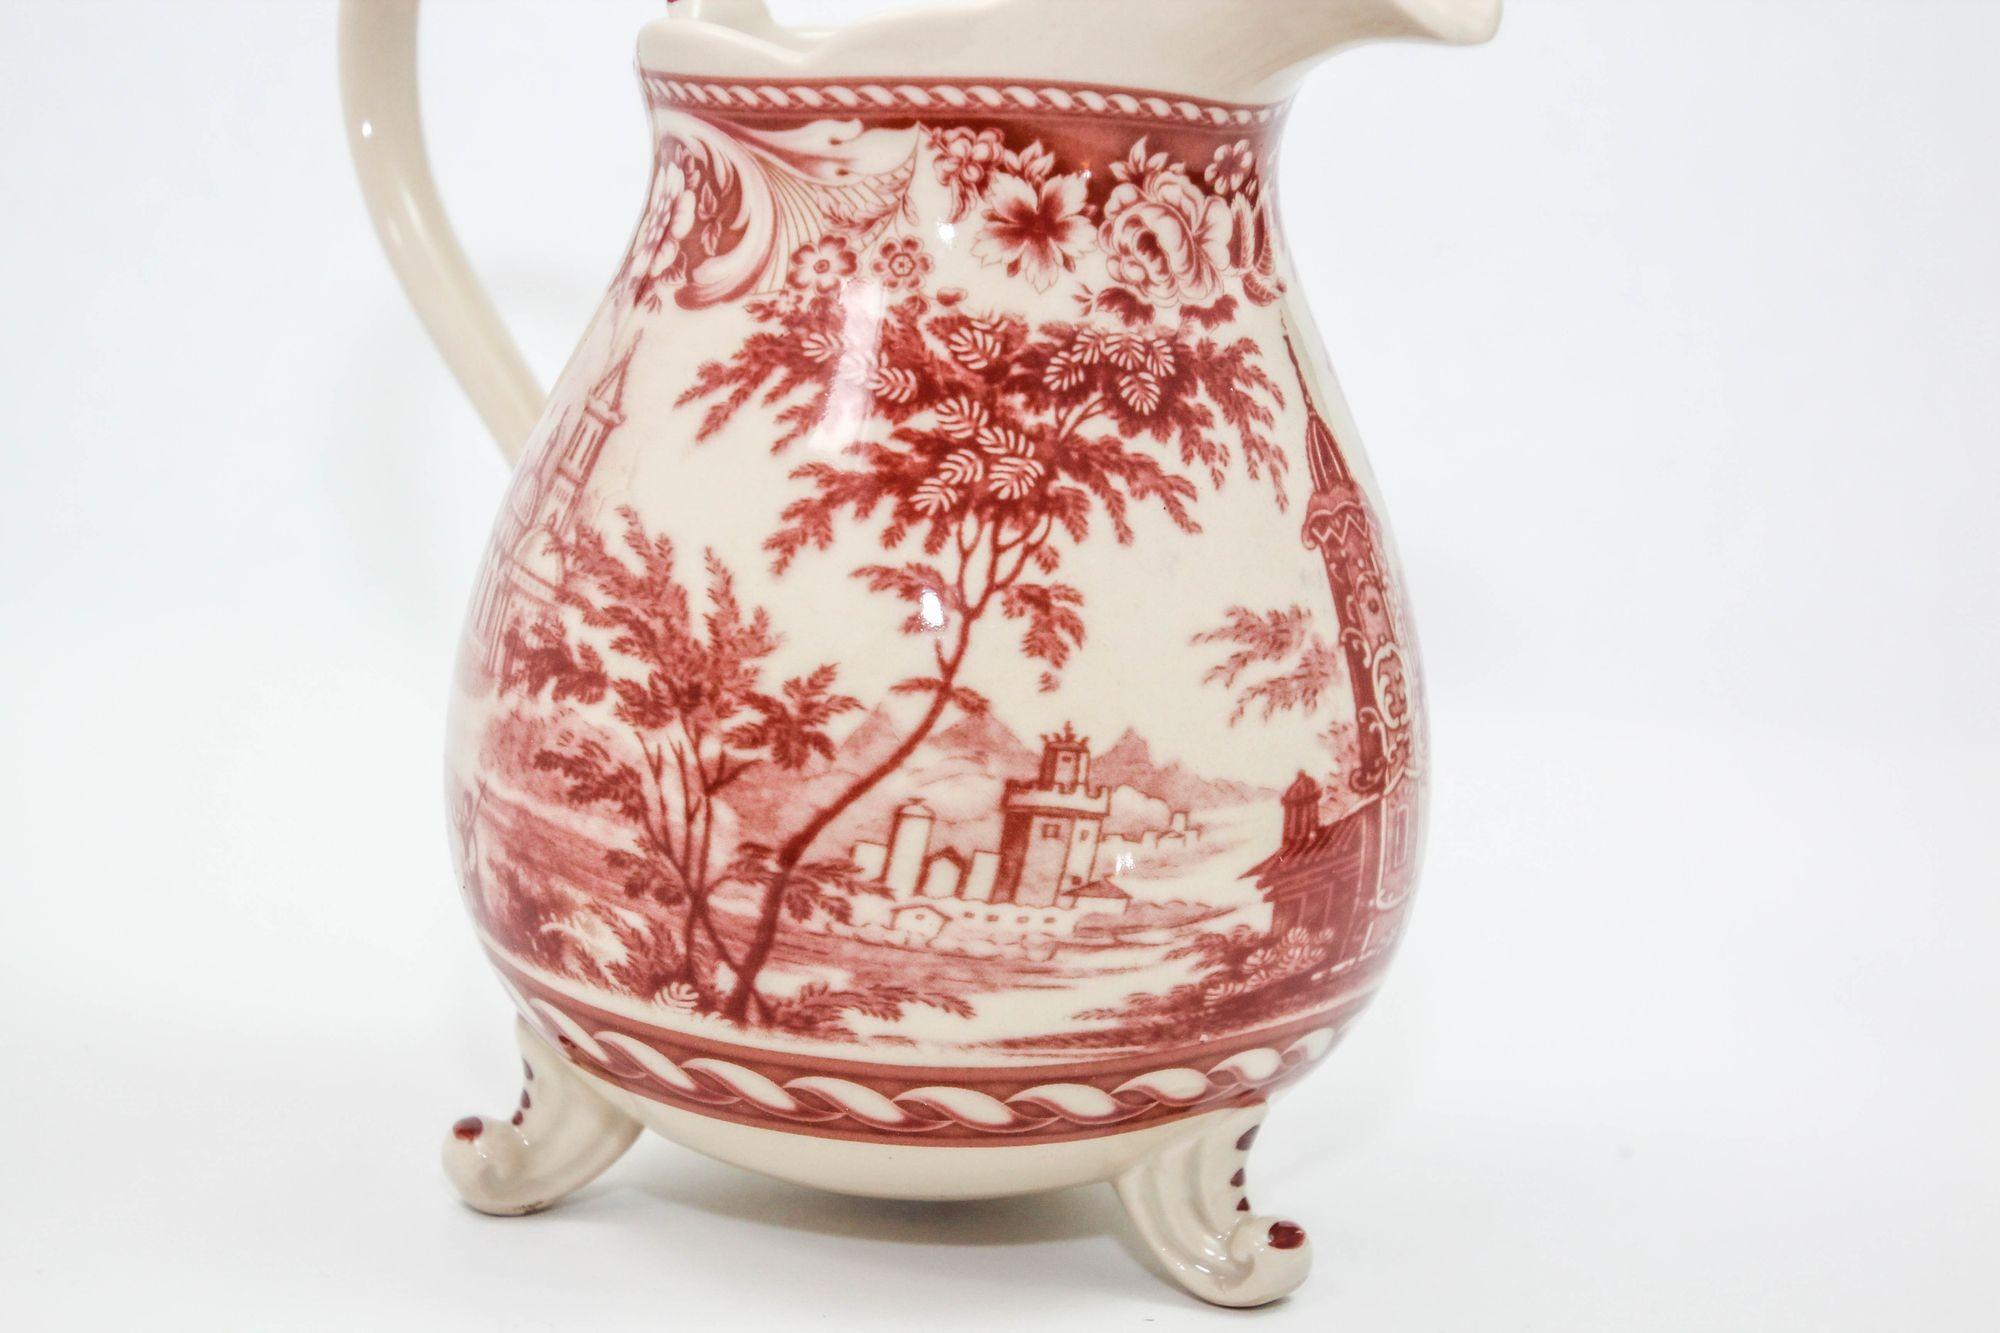 British Vintage Transferware Cranberry and White Ceramic Footed Pitcher For Sale